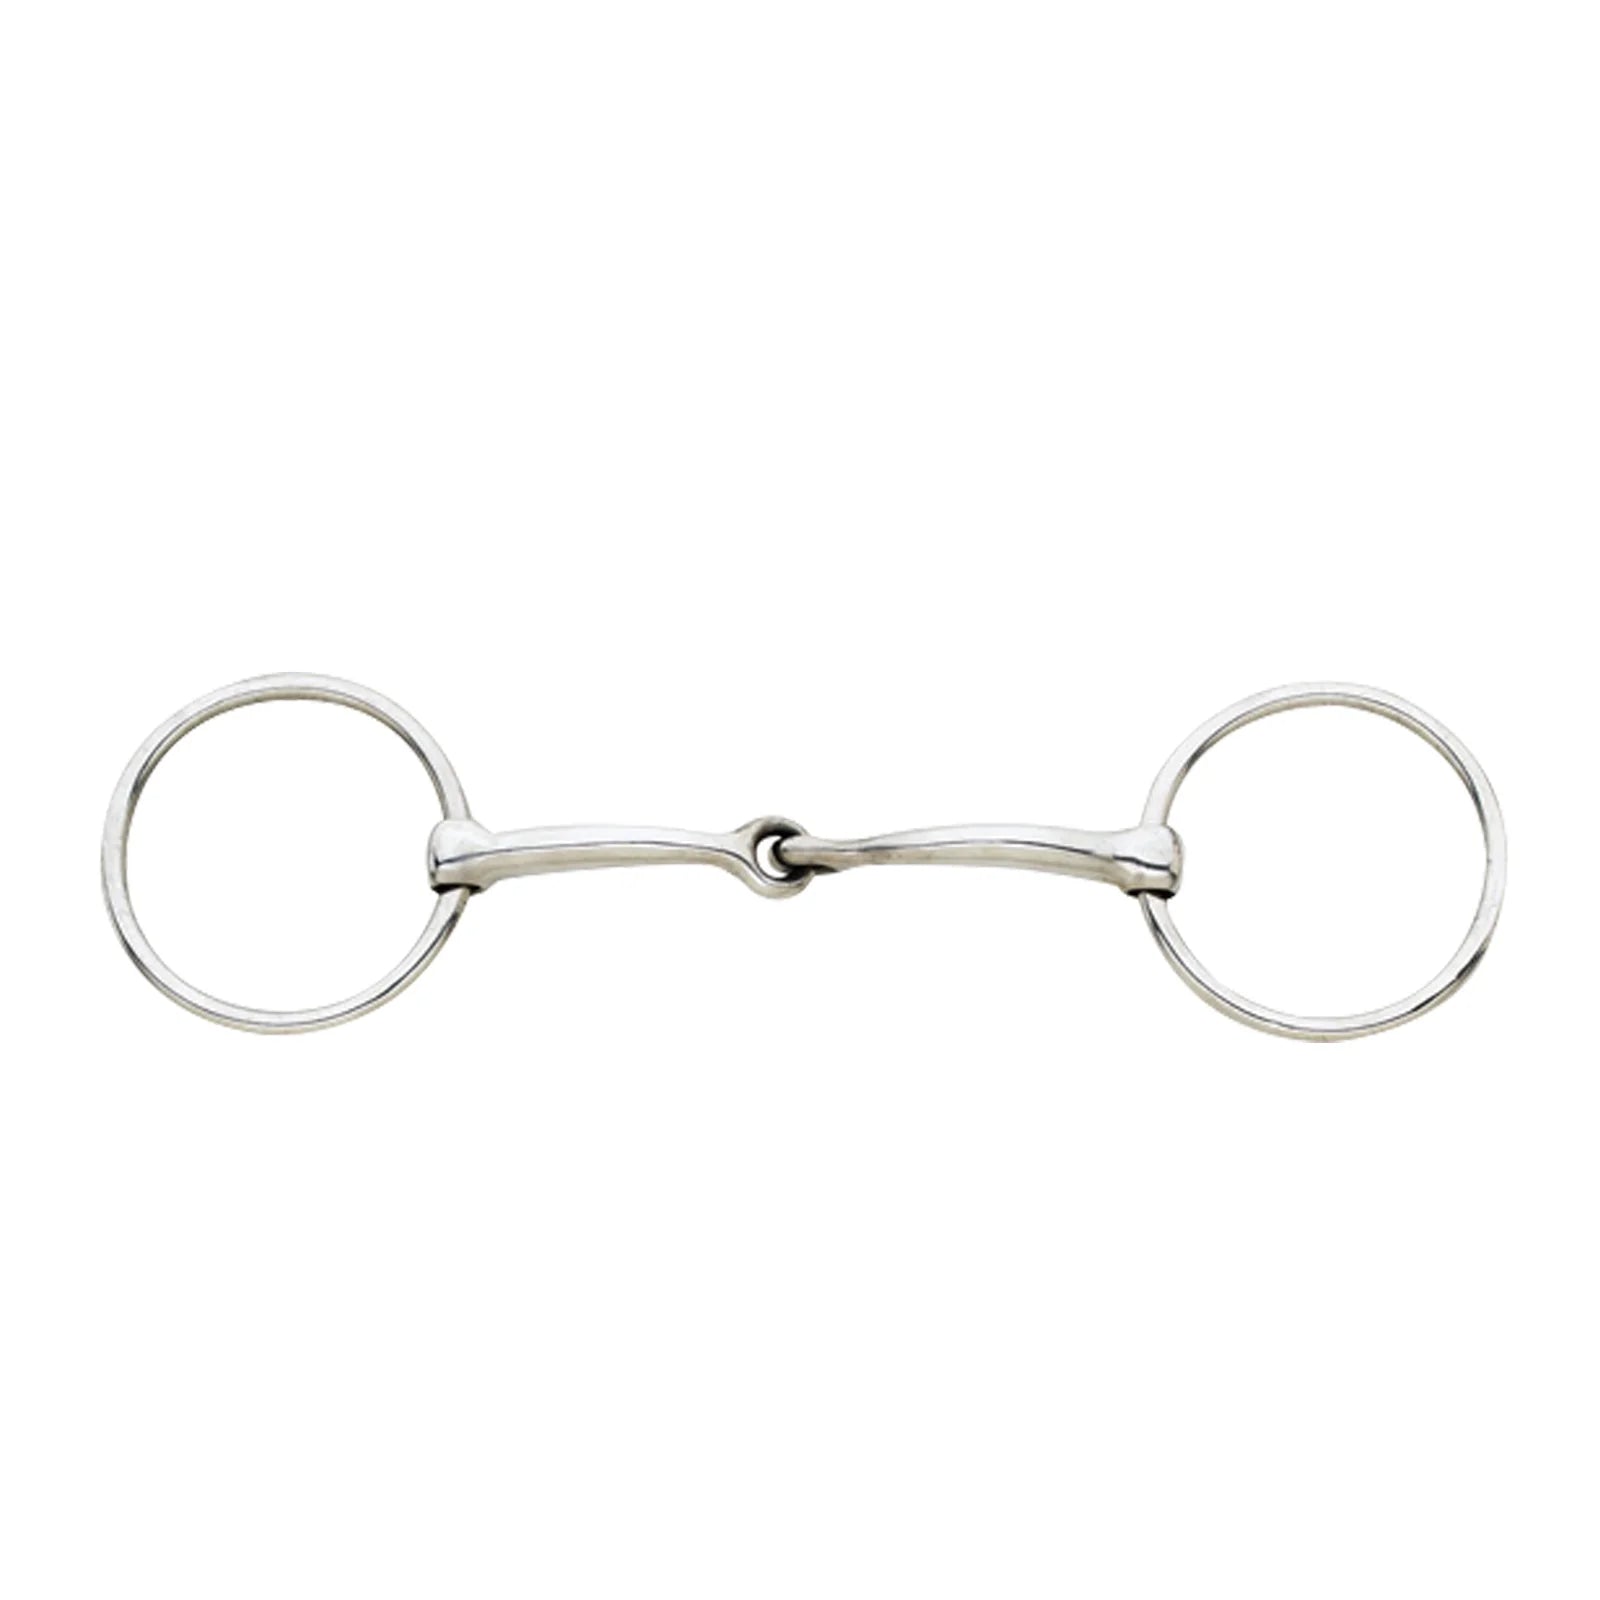 Centaur Ovation Curve Loose Ring Snaffle for comfortable horse communication by Gee Gee Equine